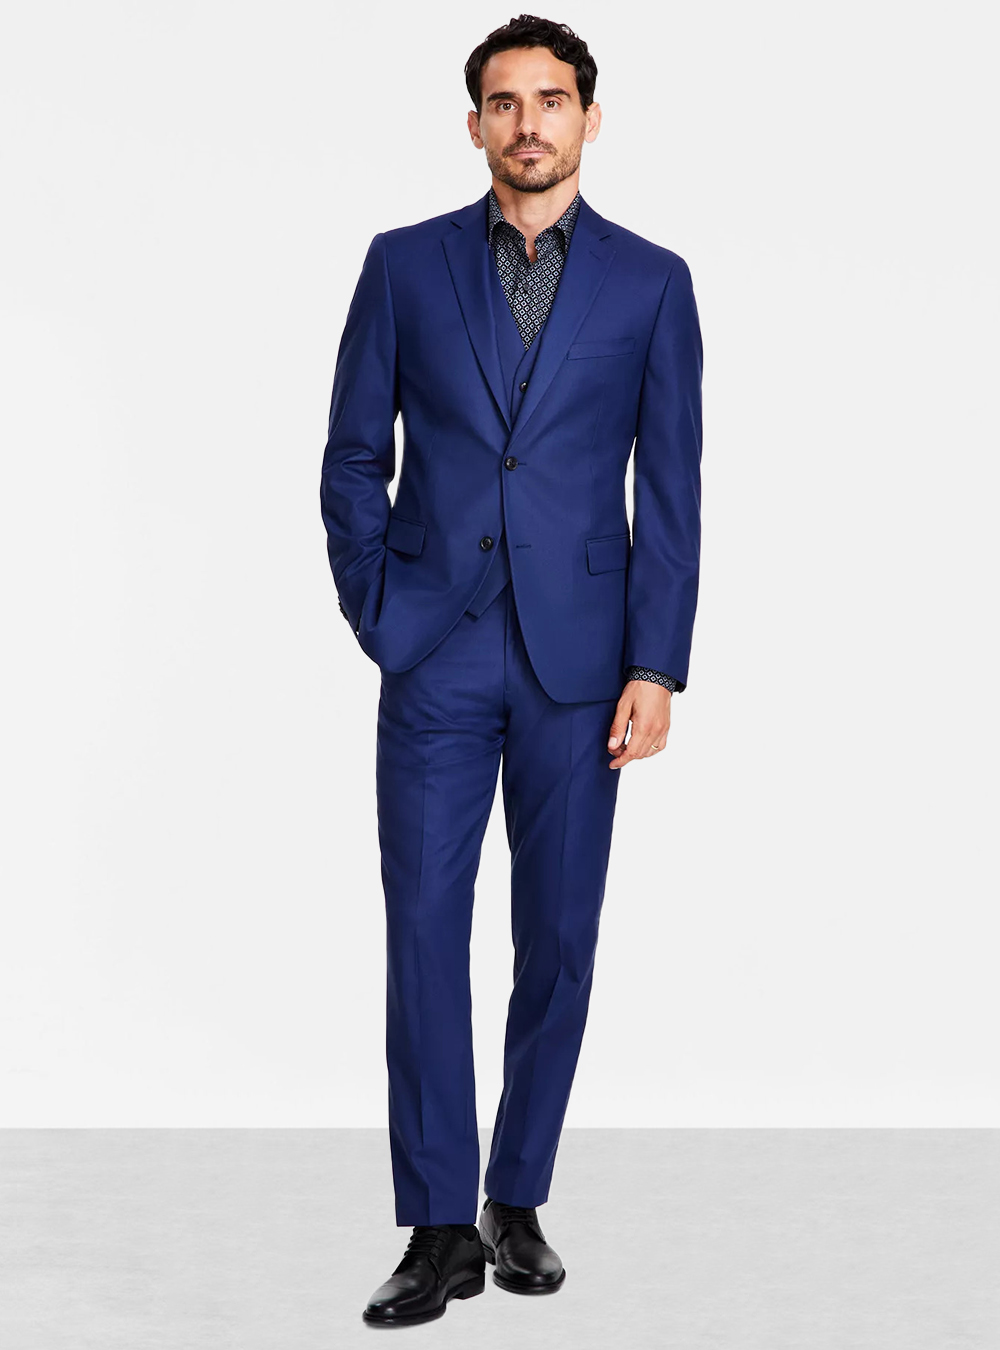 Blue three-piece suit, black and white dress shirt and black derby shoes